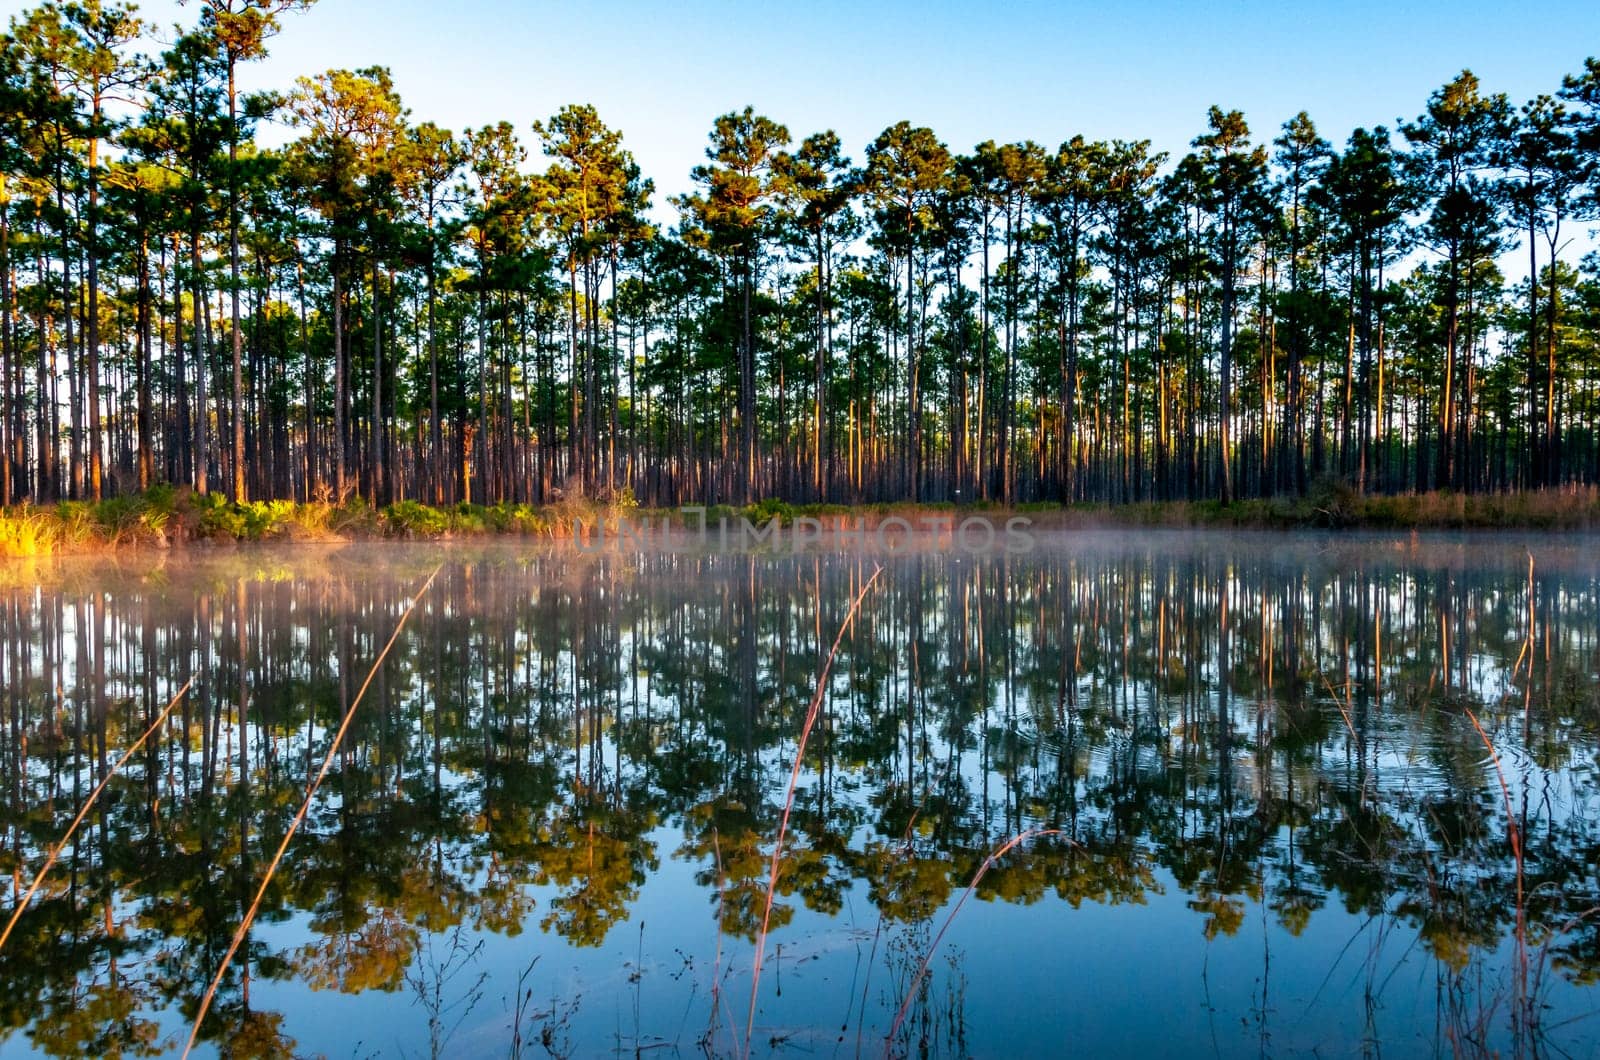 Reflection of trees in the lake water in the evening at sunset, Louisiana, USA